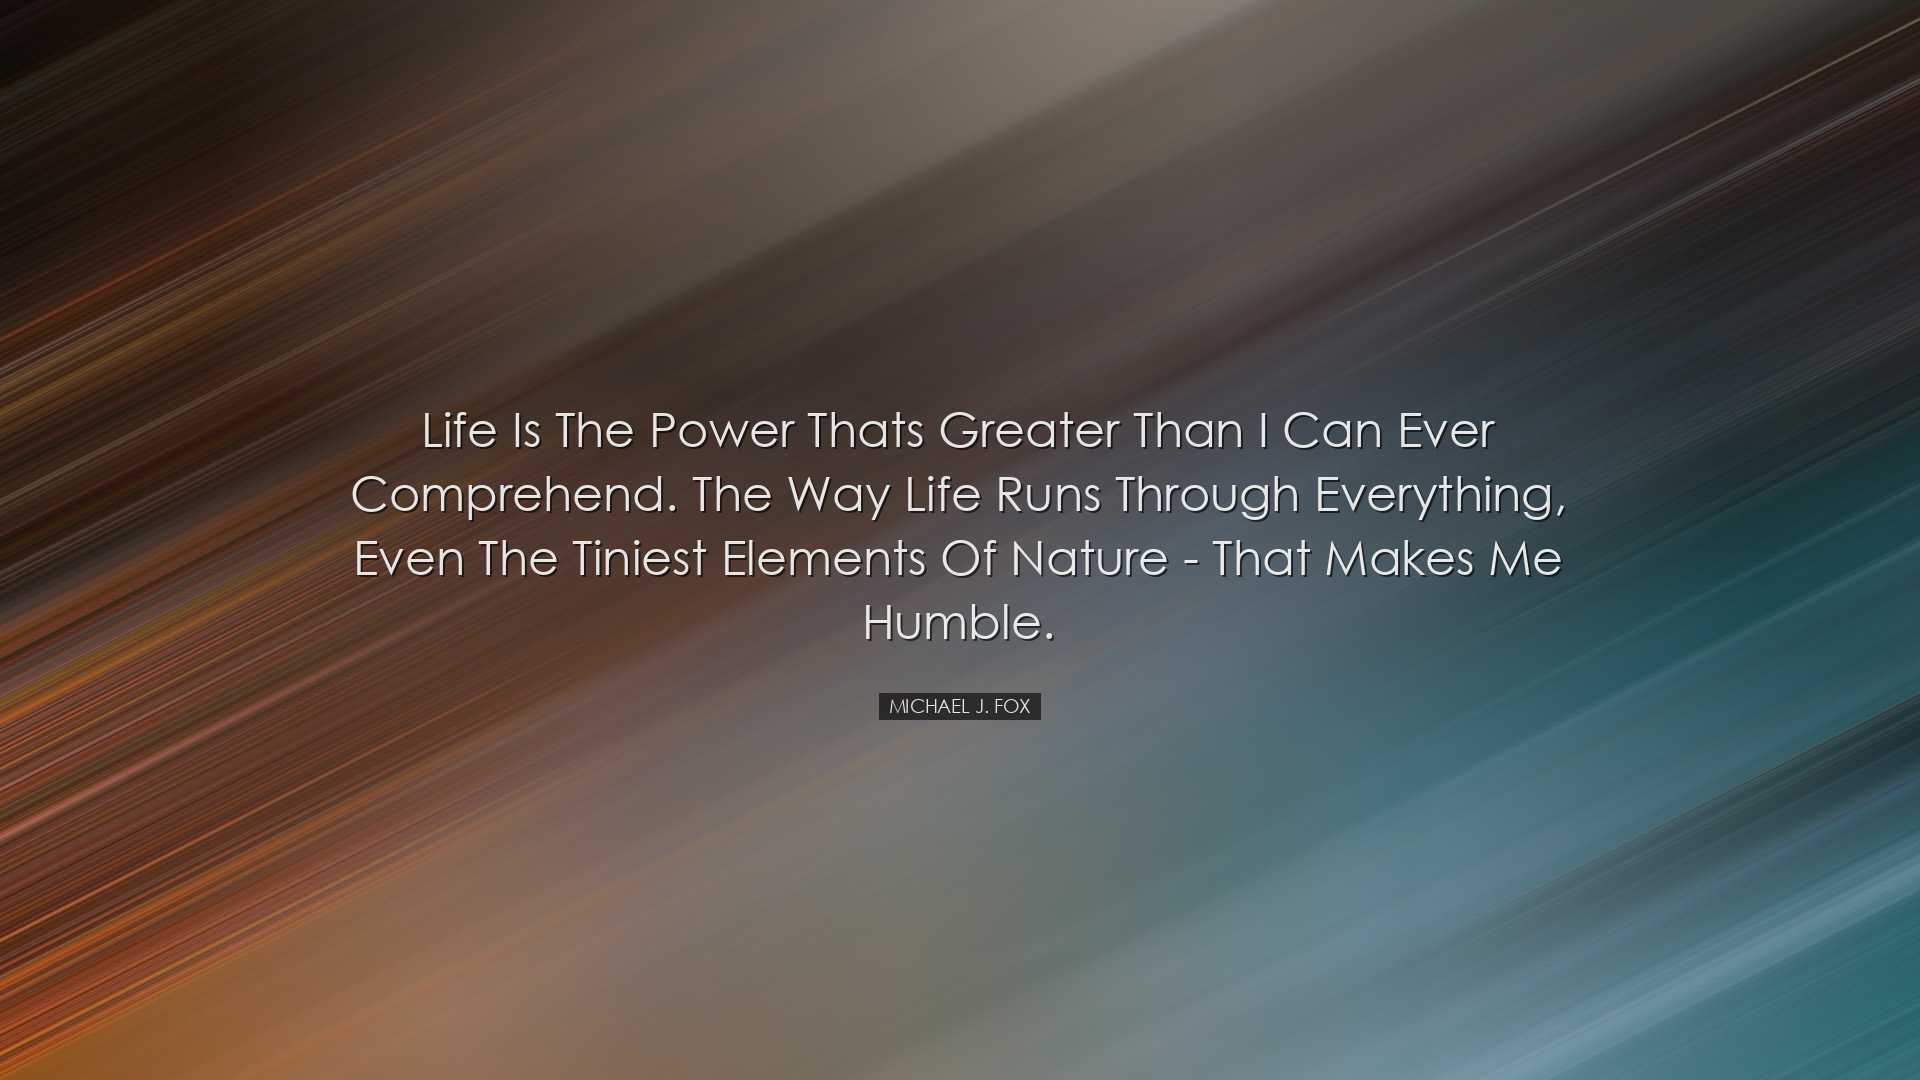 Life is the power thats greater than I can ever comprehend. The wa